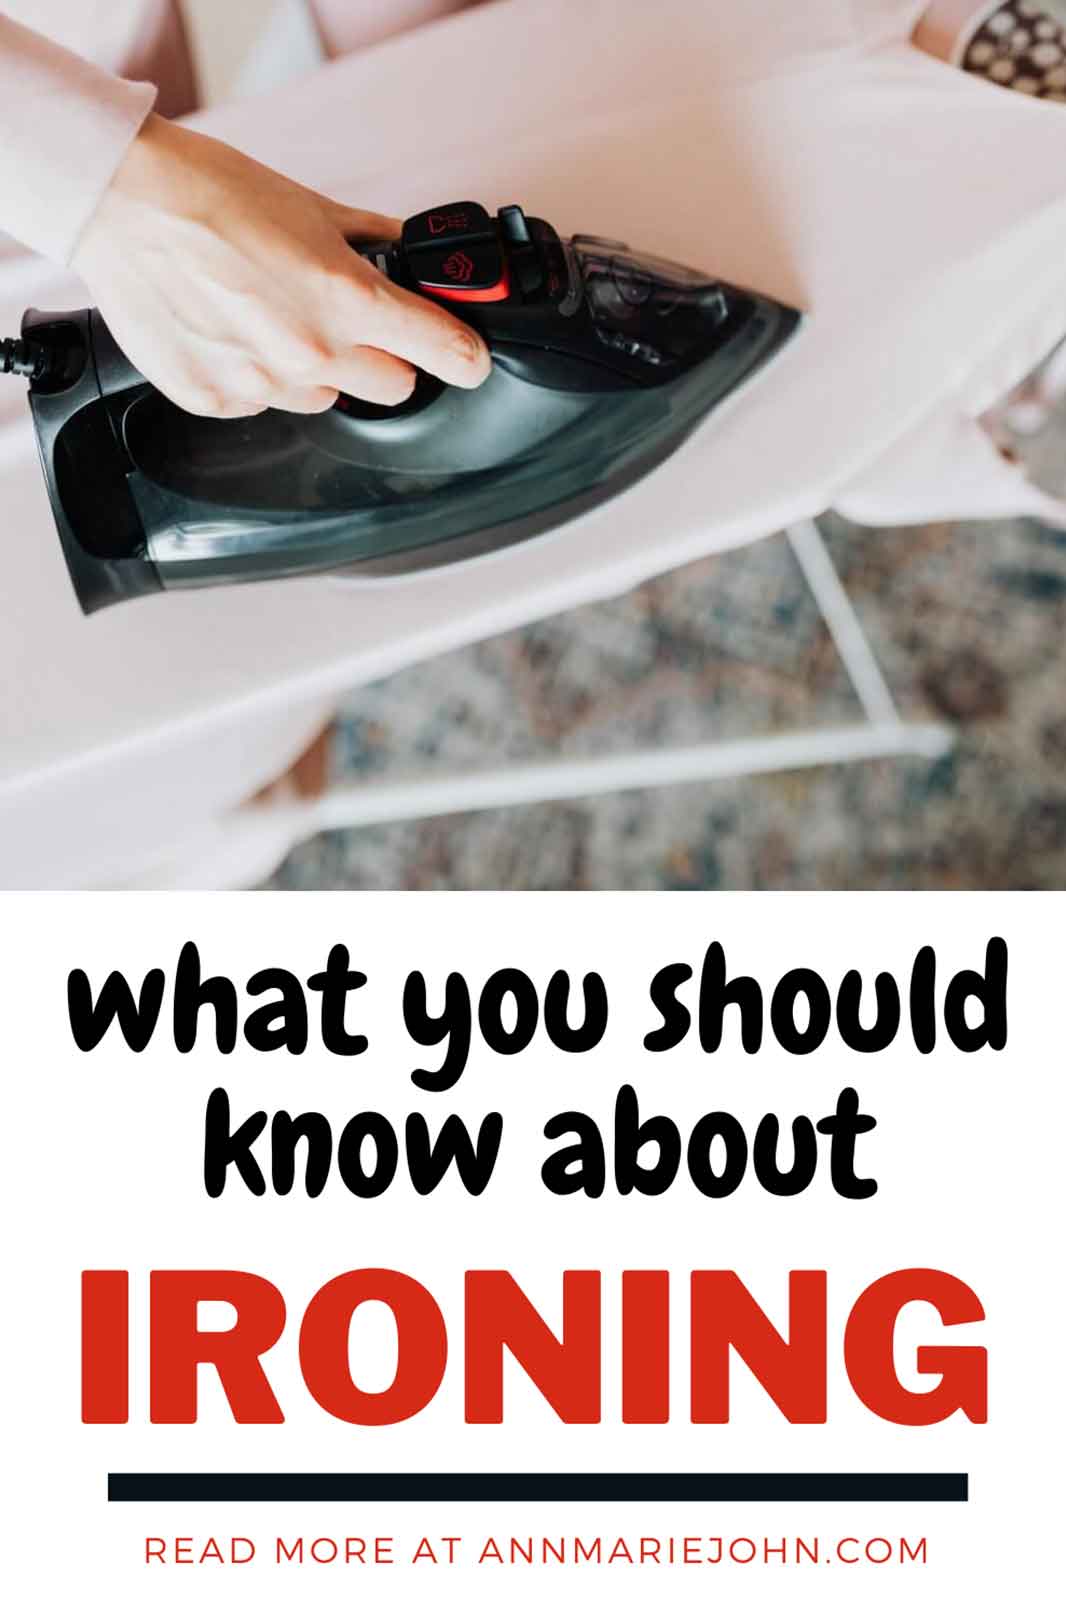 What You Should Know About Ironing